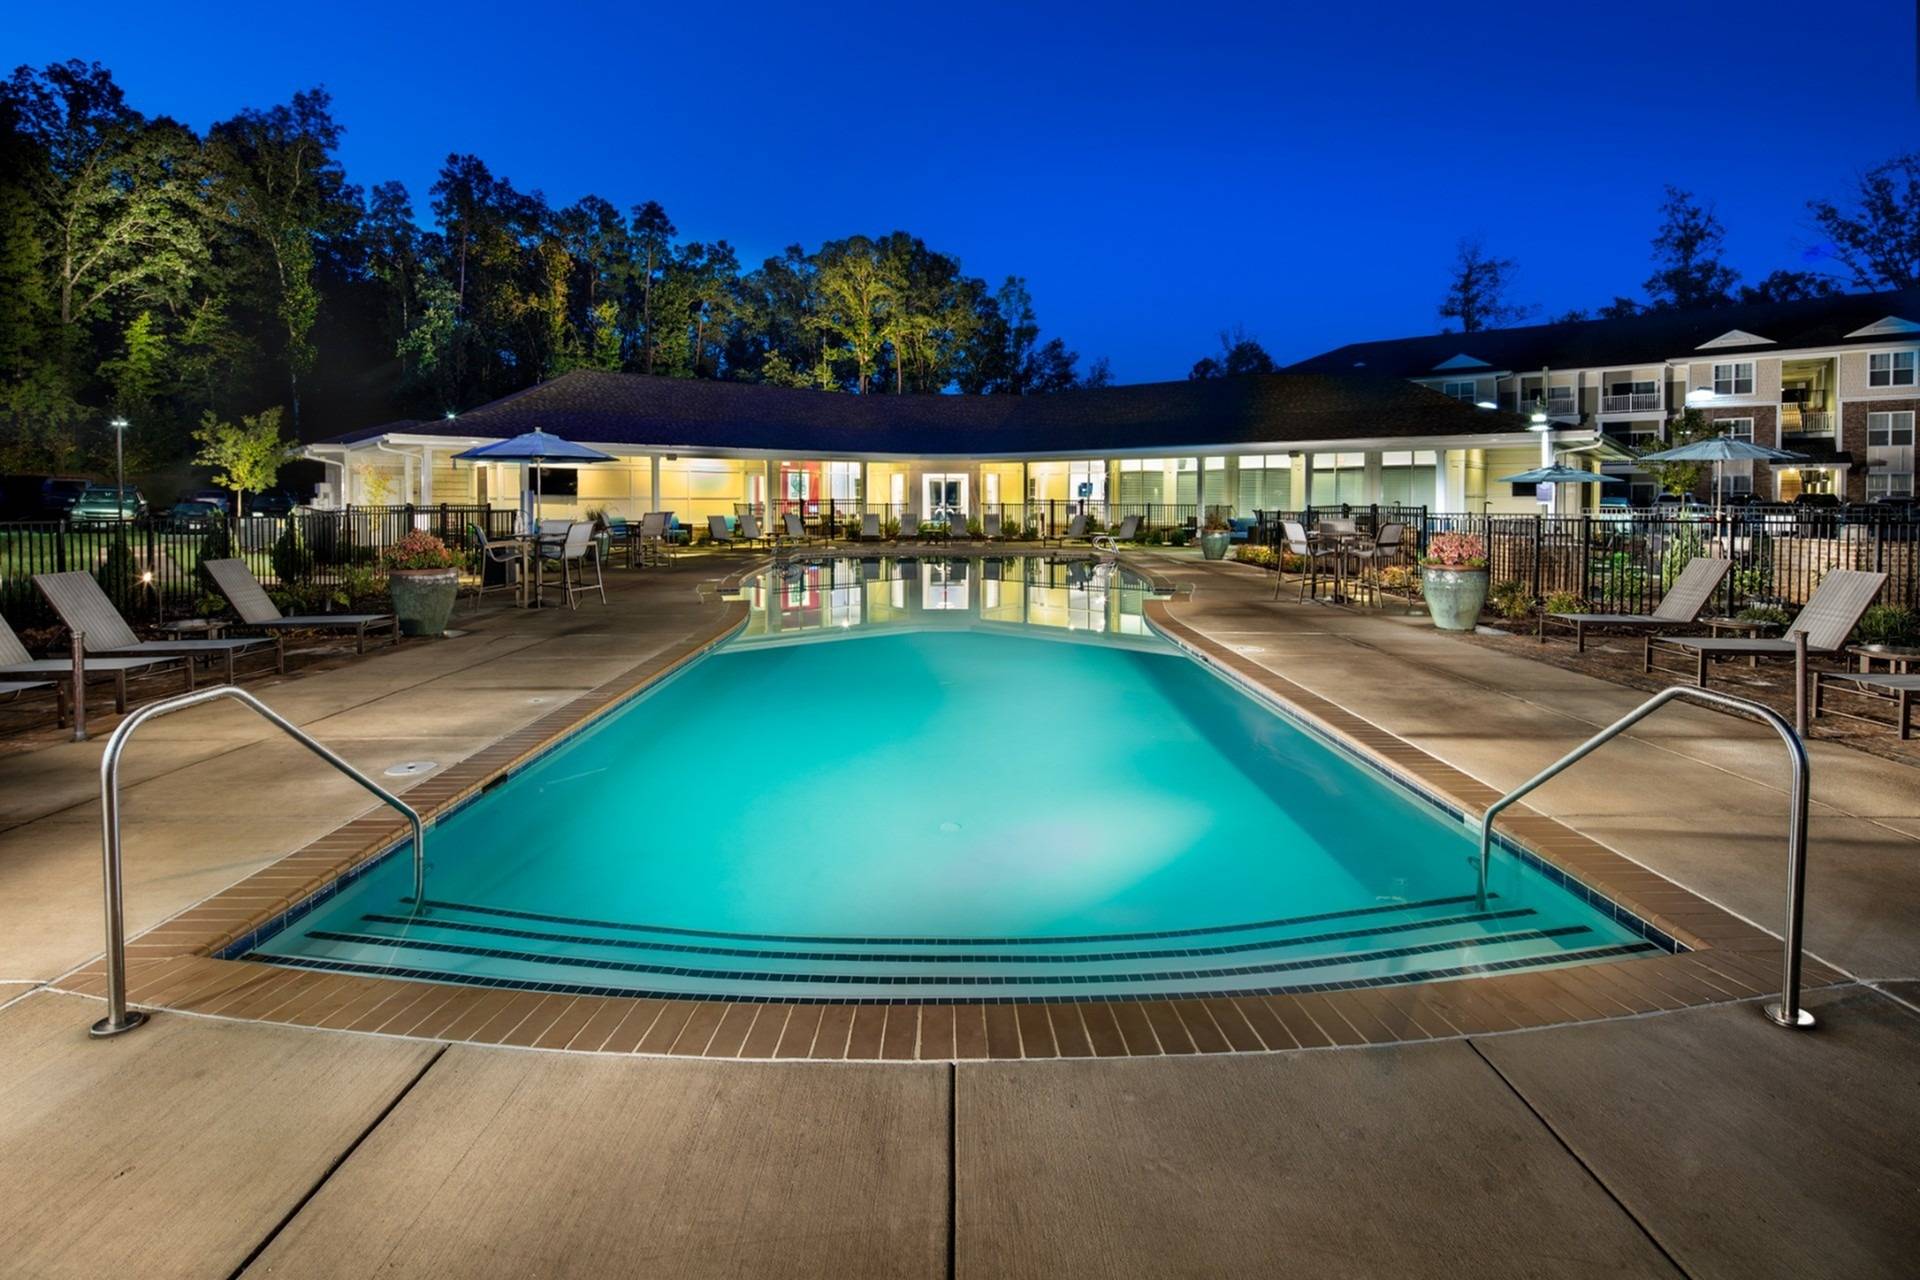 Pool at Dusk | Apartments in Midlothian, VA | Colony at Centerpointe